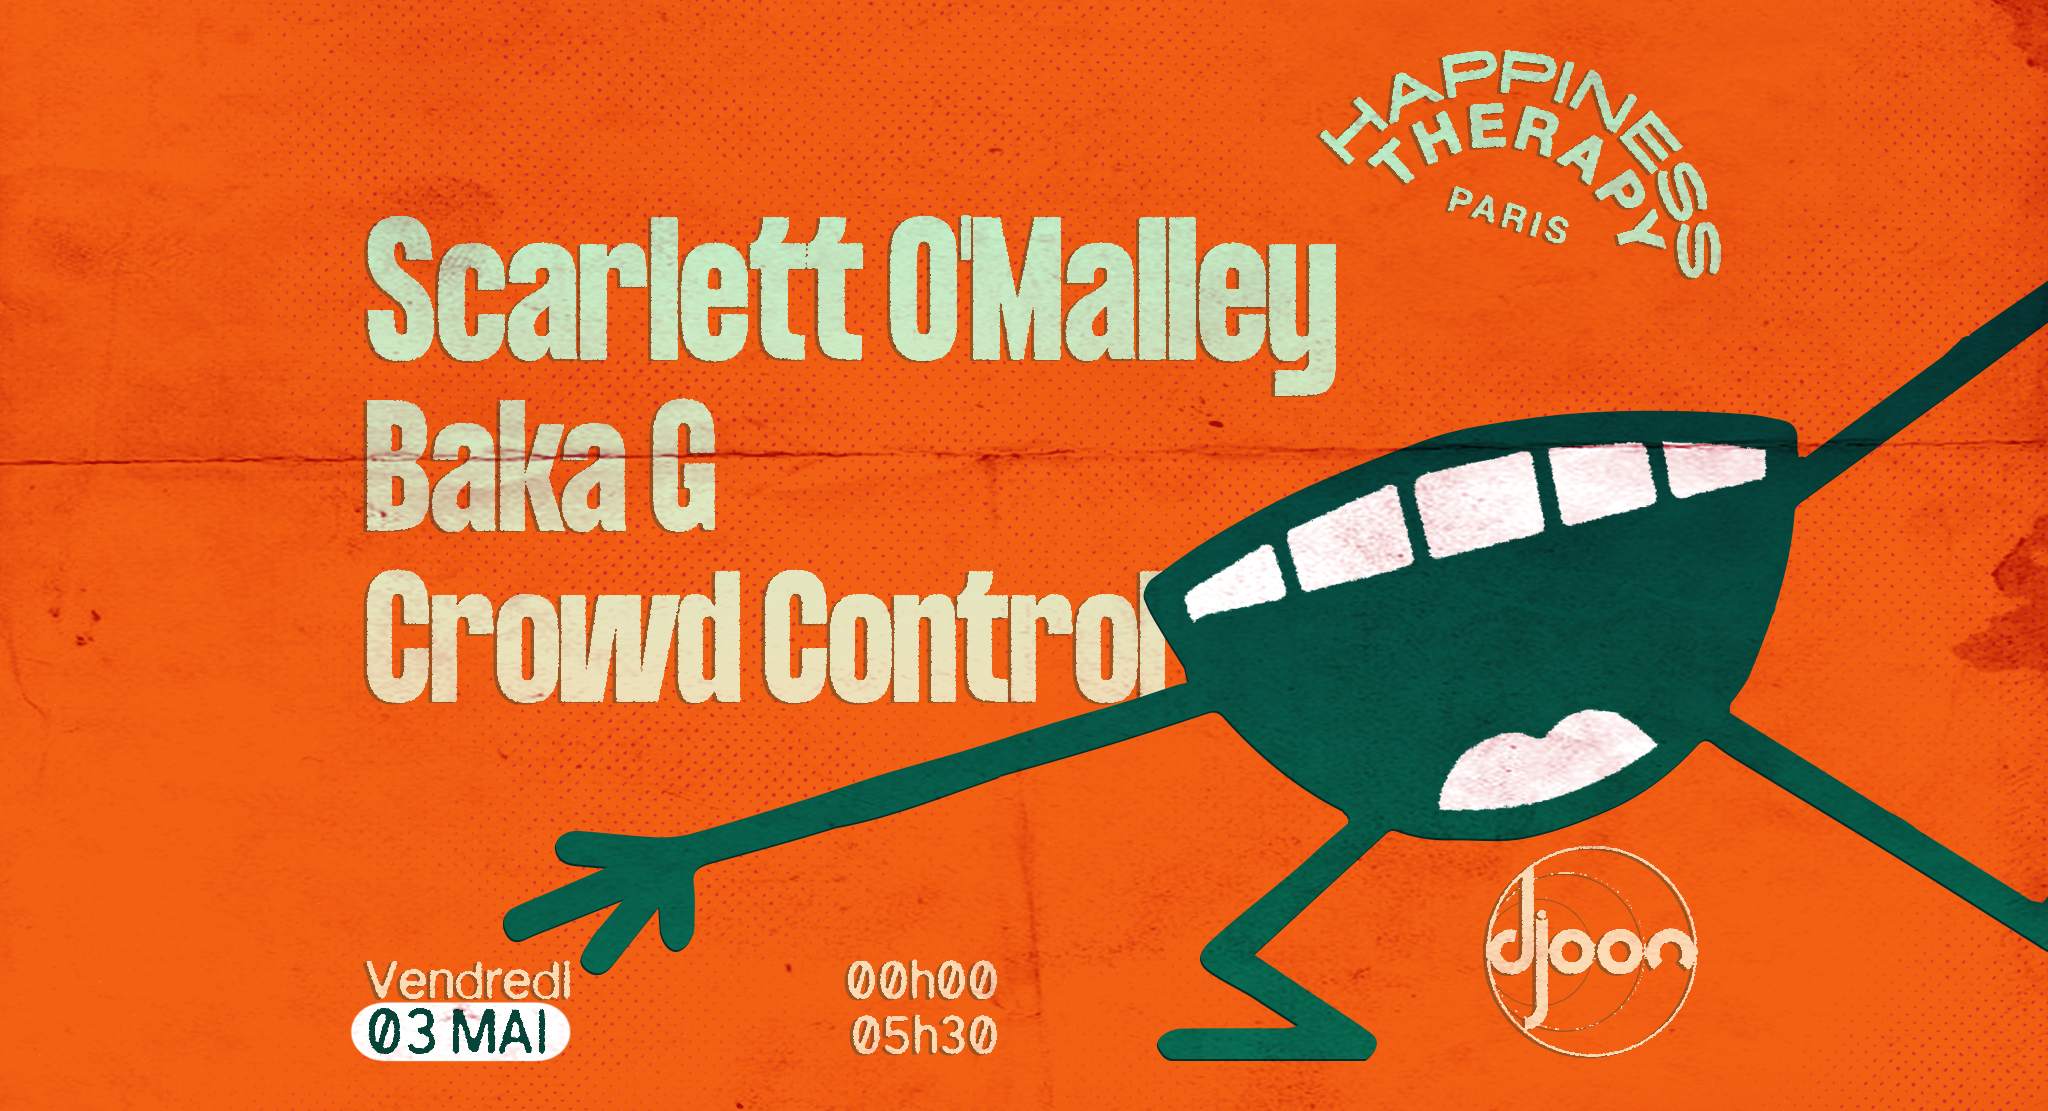 Happiness Therapy: Scarlett O'Malley, Baka G, Crowd Control - フライヤー表